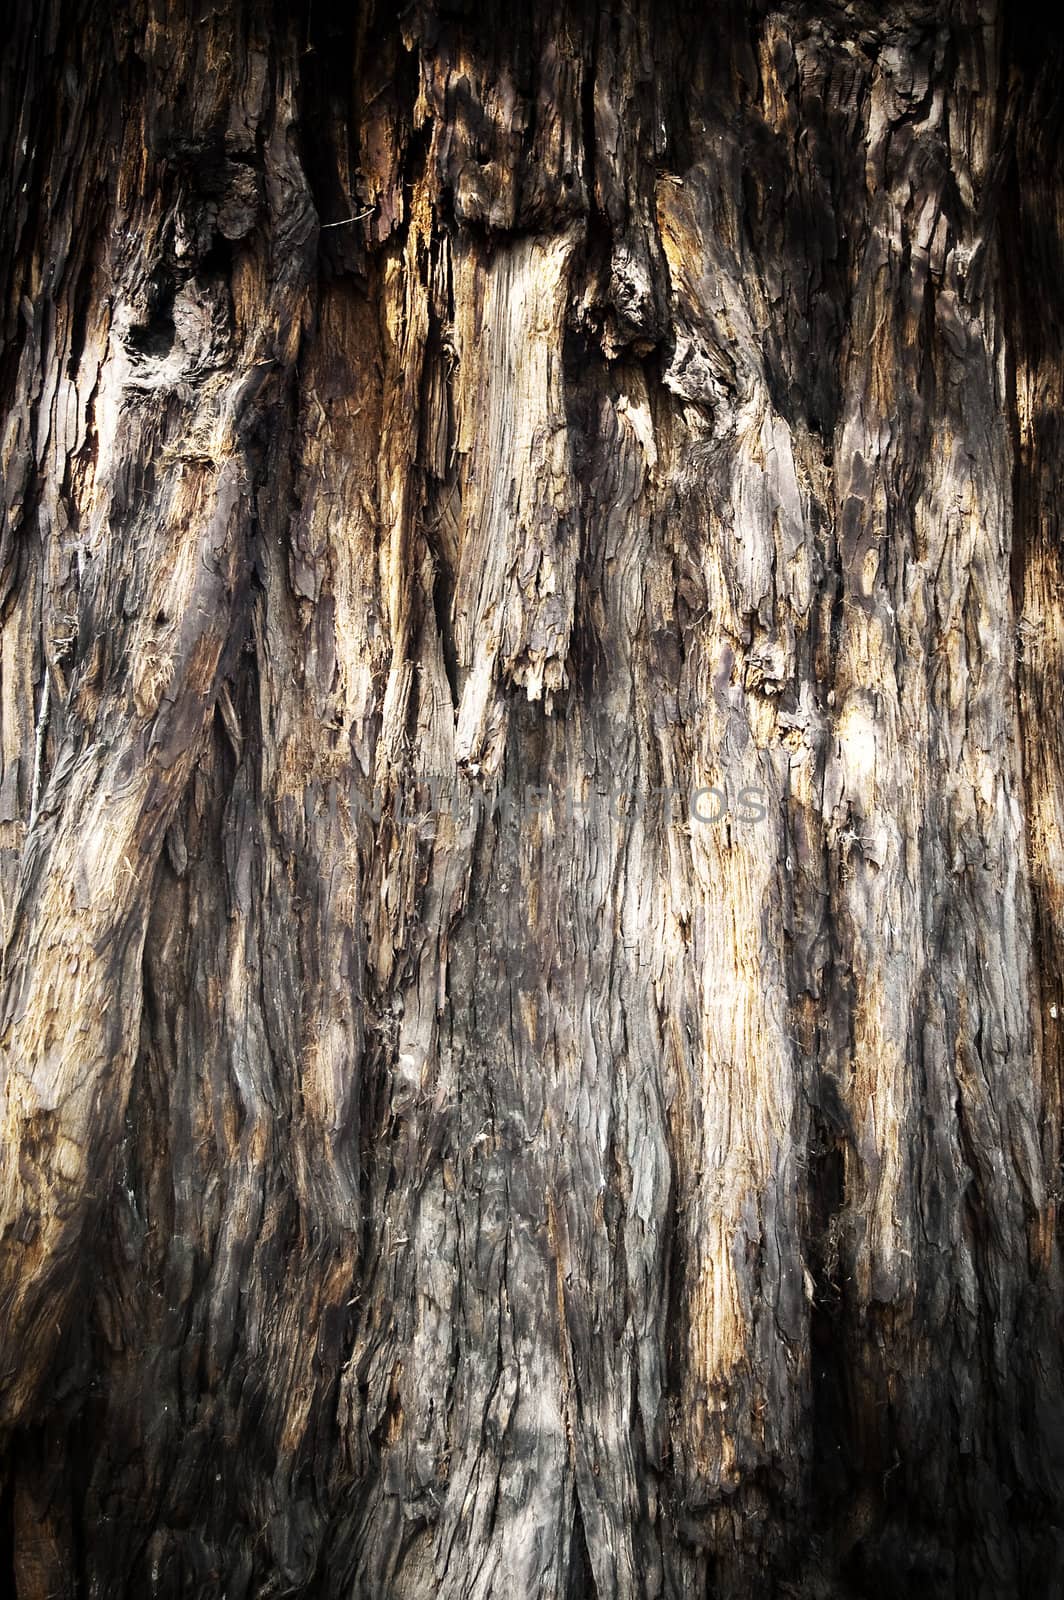 A close up of a textured bark of tree